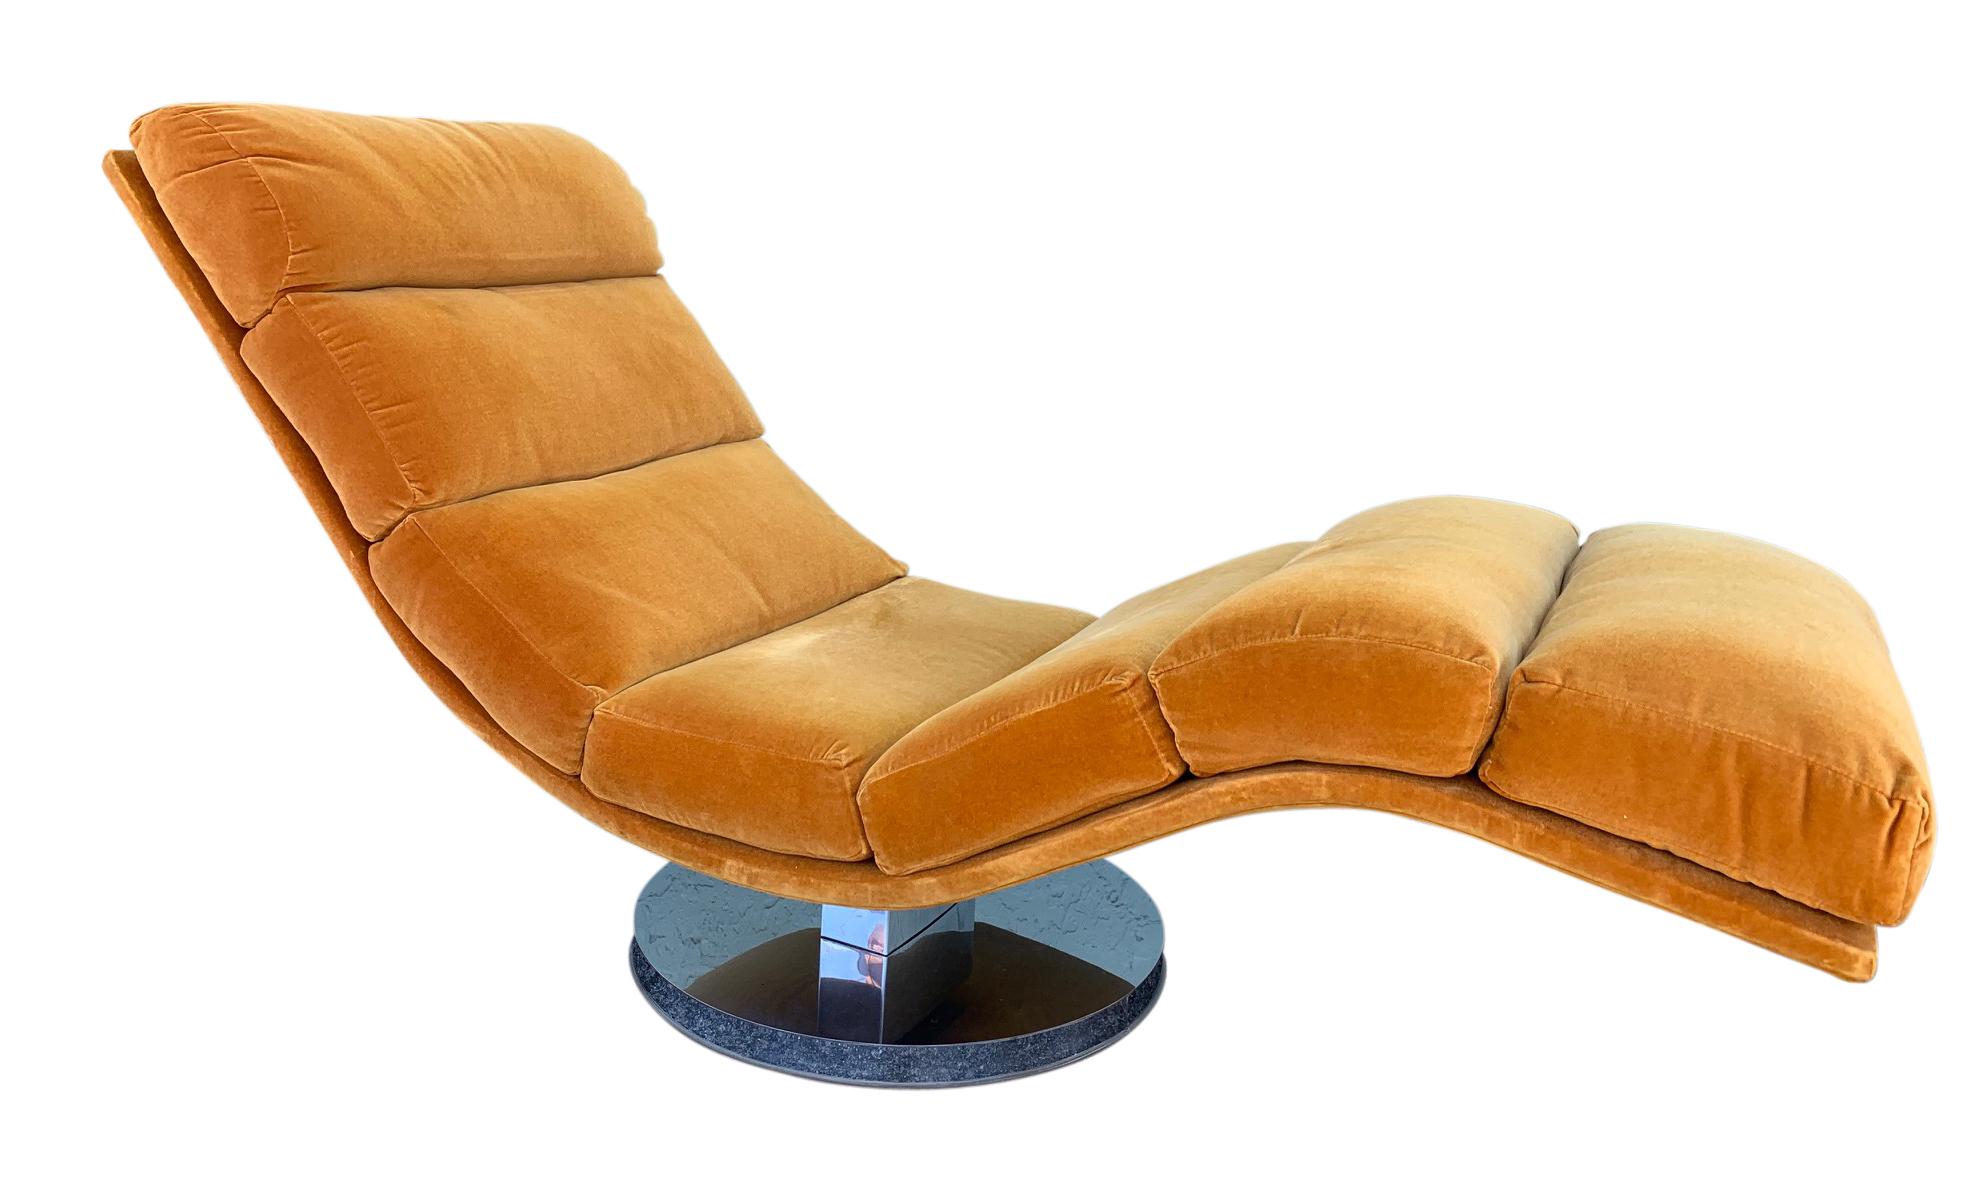 North American Swivel Rocking Wave Chaise Lounge Chair by Milo Baughman for Thayer Coggin